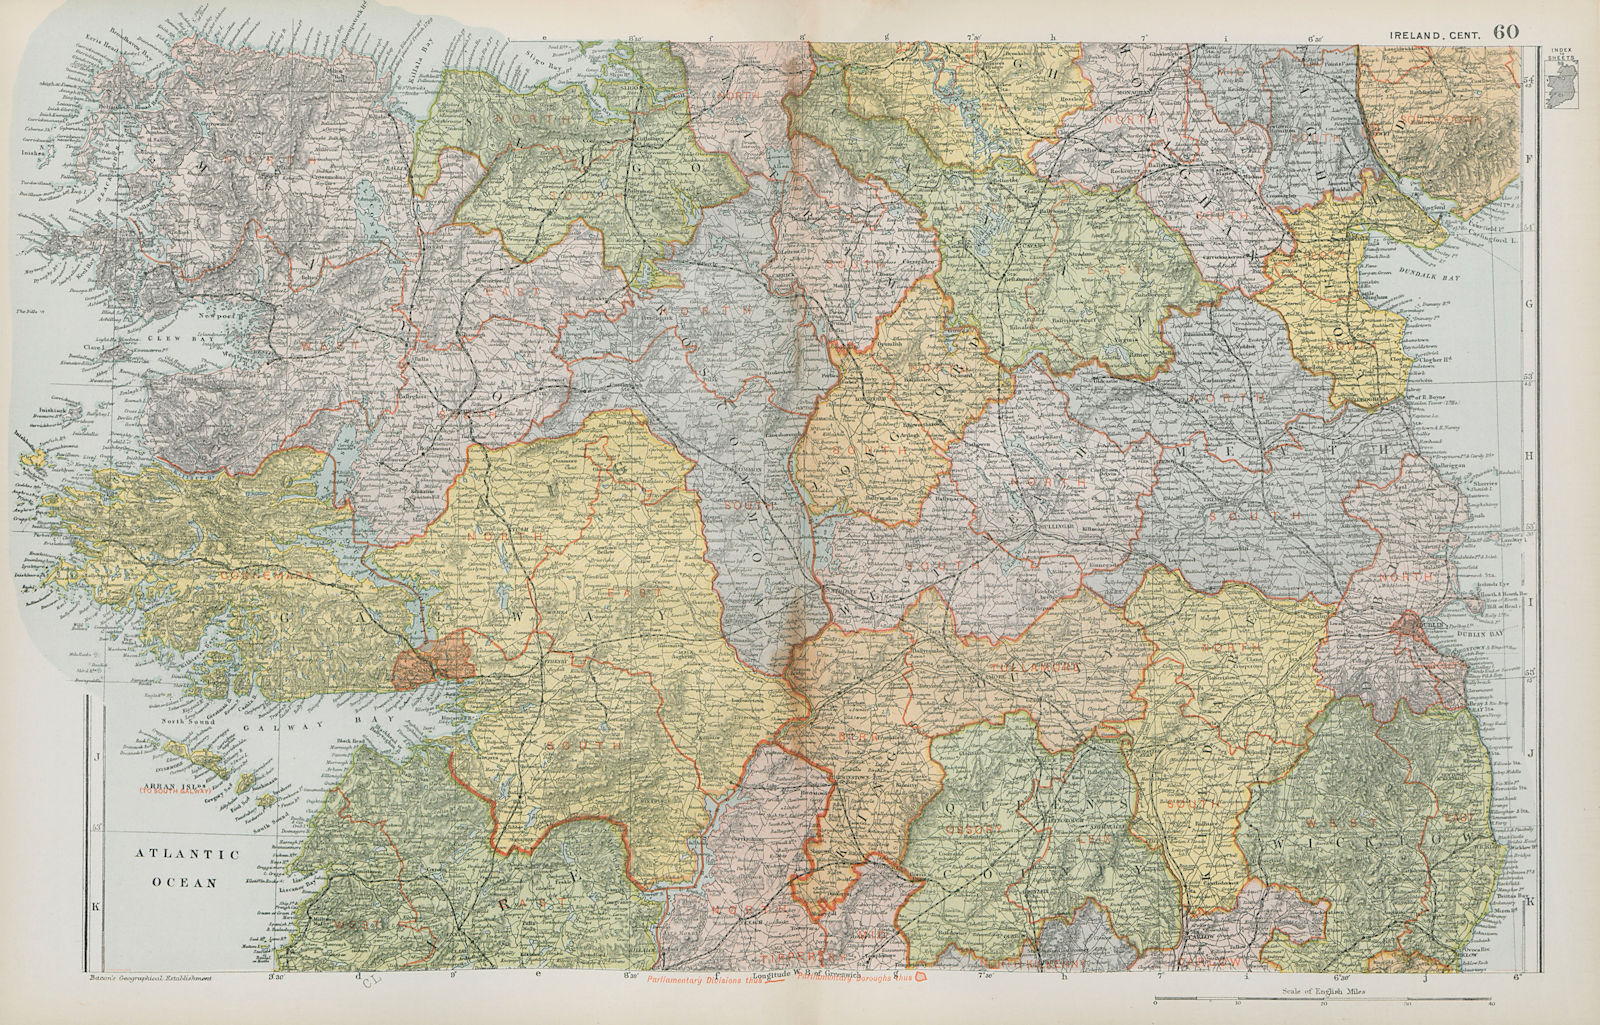 Associate Product CENTRAL IRELAND. Showing parliamentary divisions & boroughs. BACON 1900 map